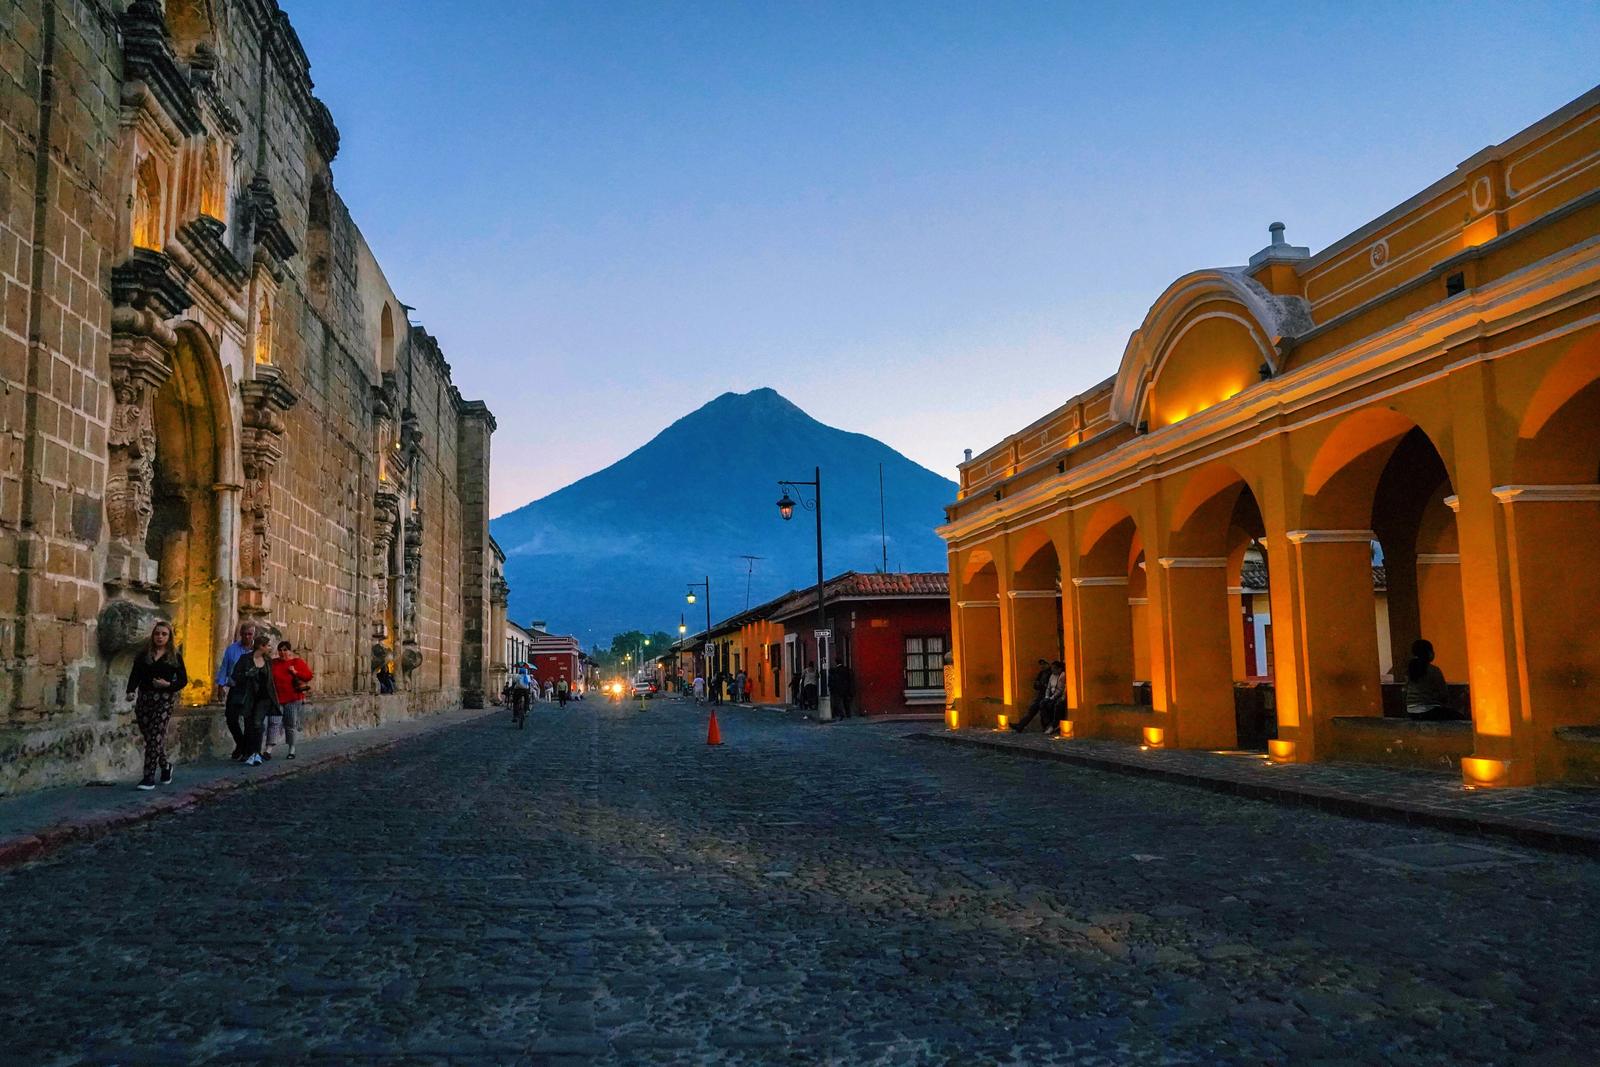 If You Can Score More Than 18 on This Famous Landmarks Quiz, You Probably Know All About the World Guatemala